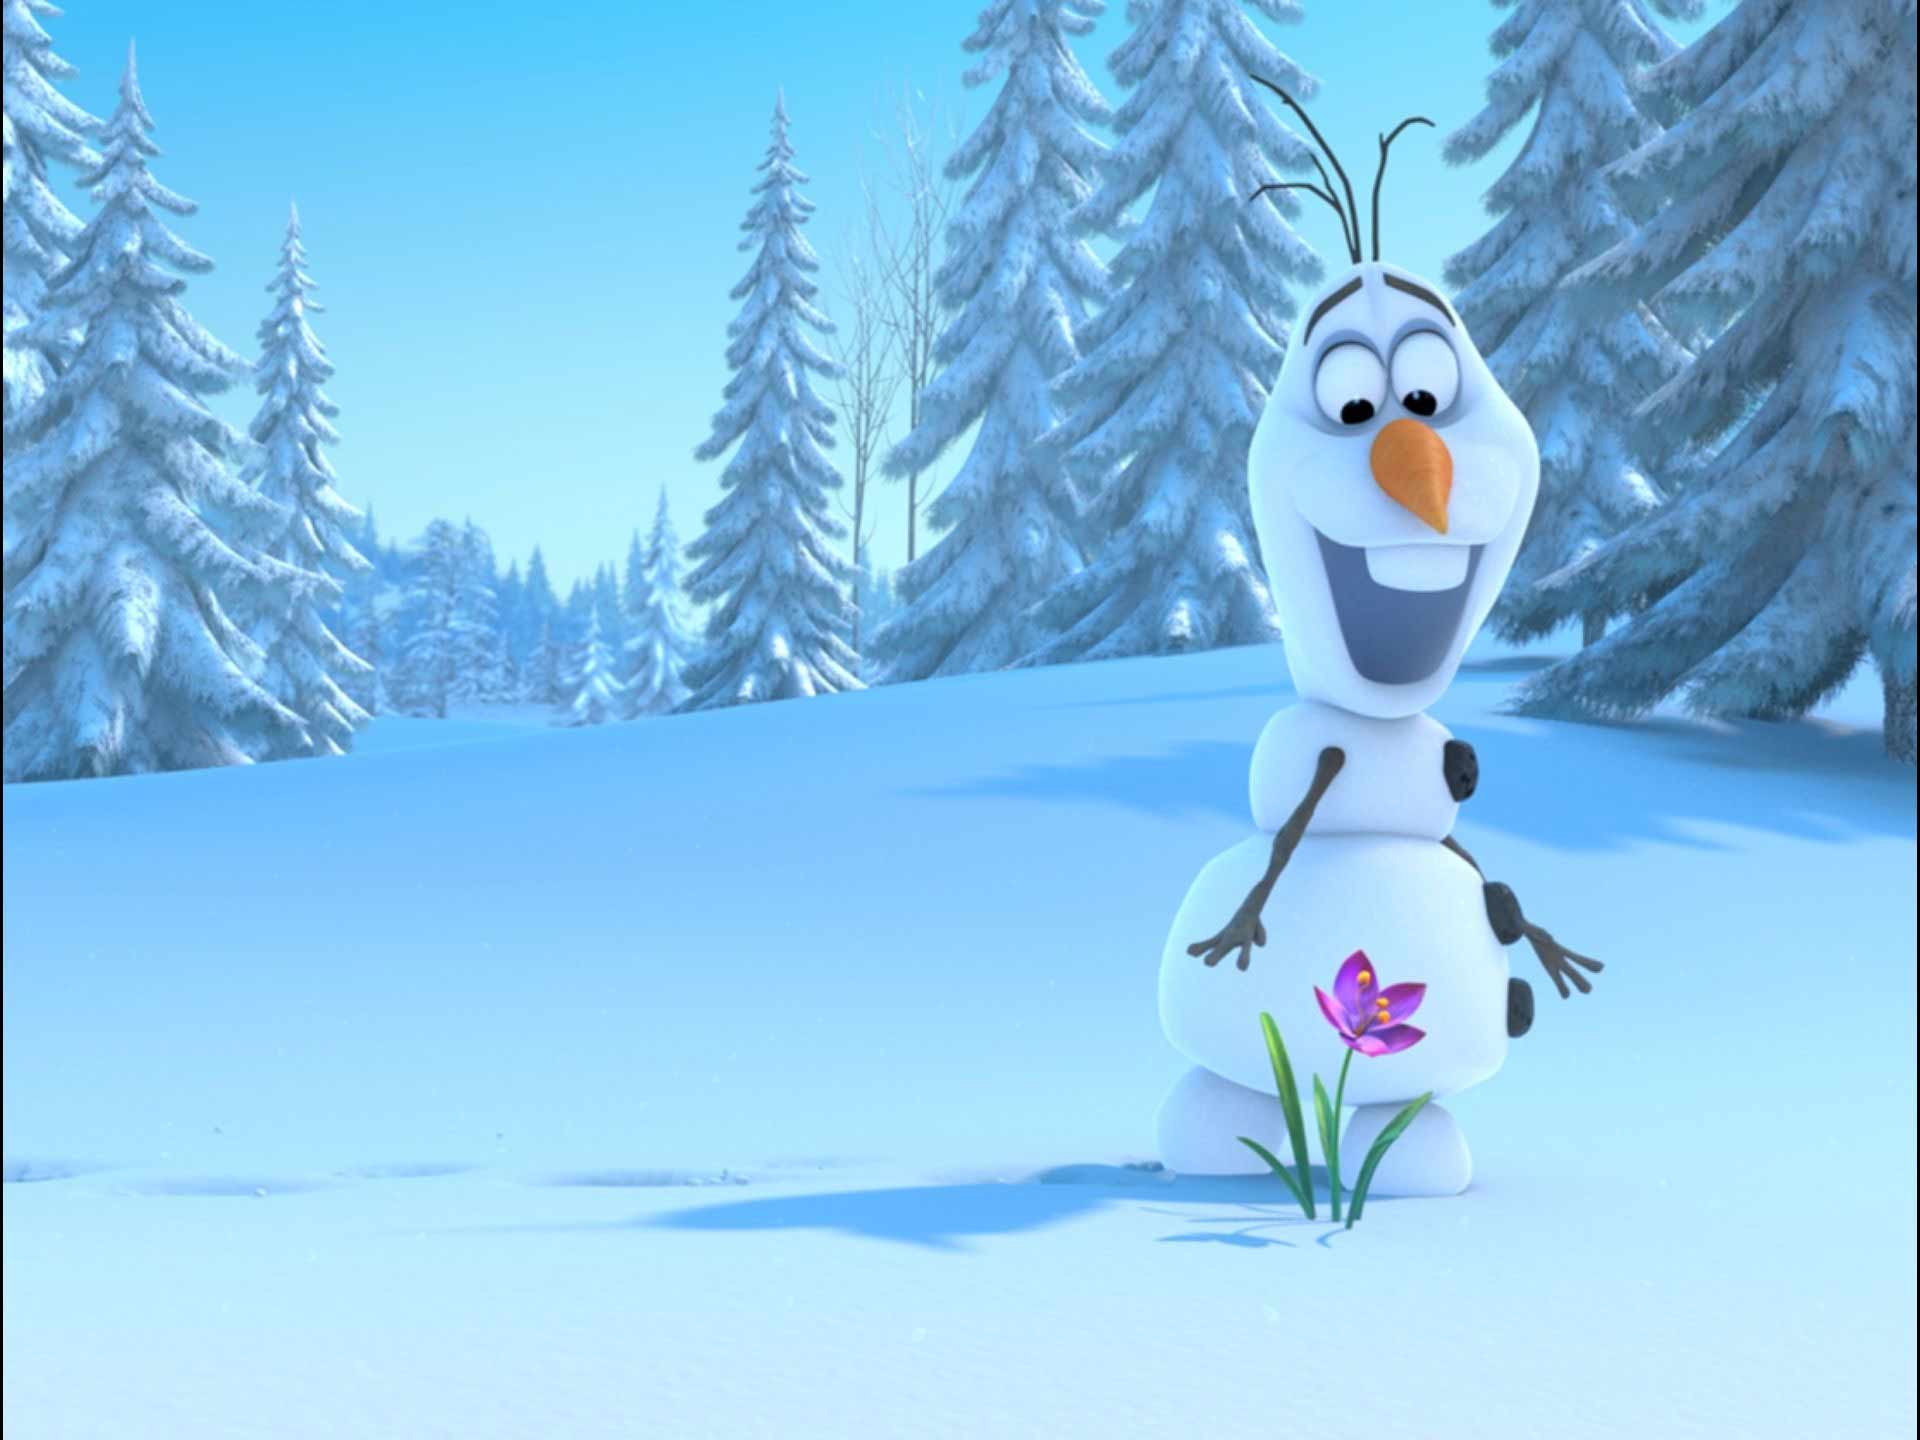  backgrounds anna frozen movie wallpapers free disney movie wallpapers1 1920x1440